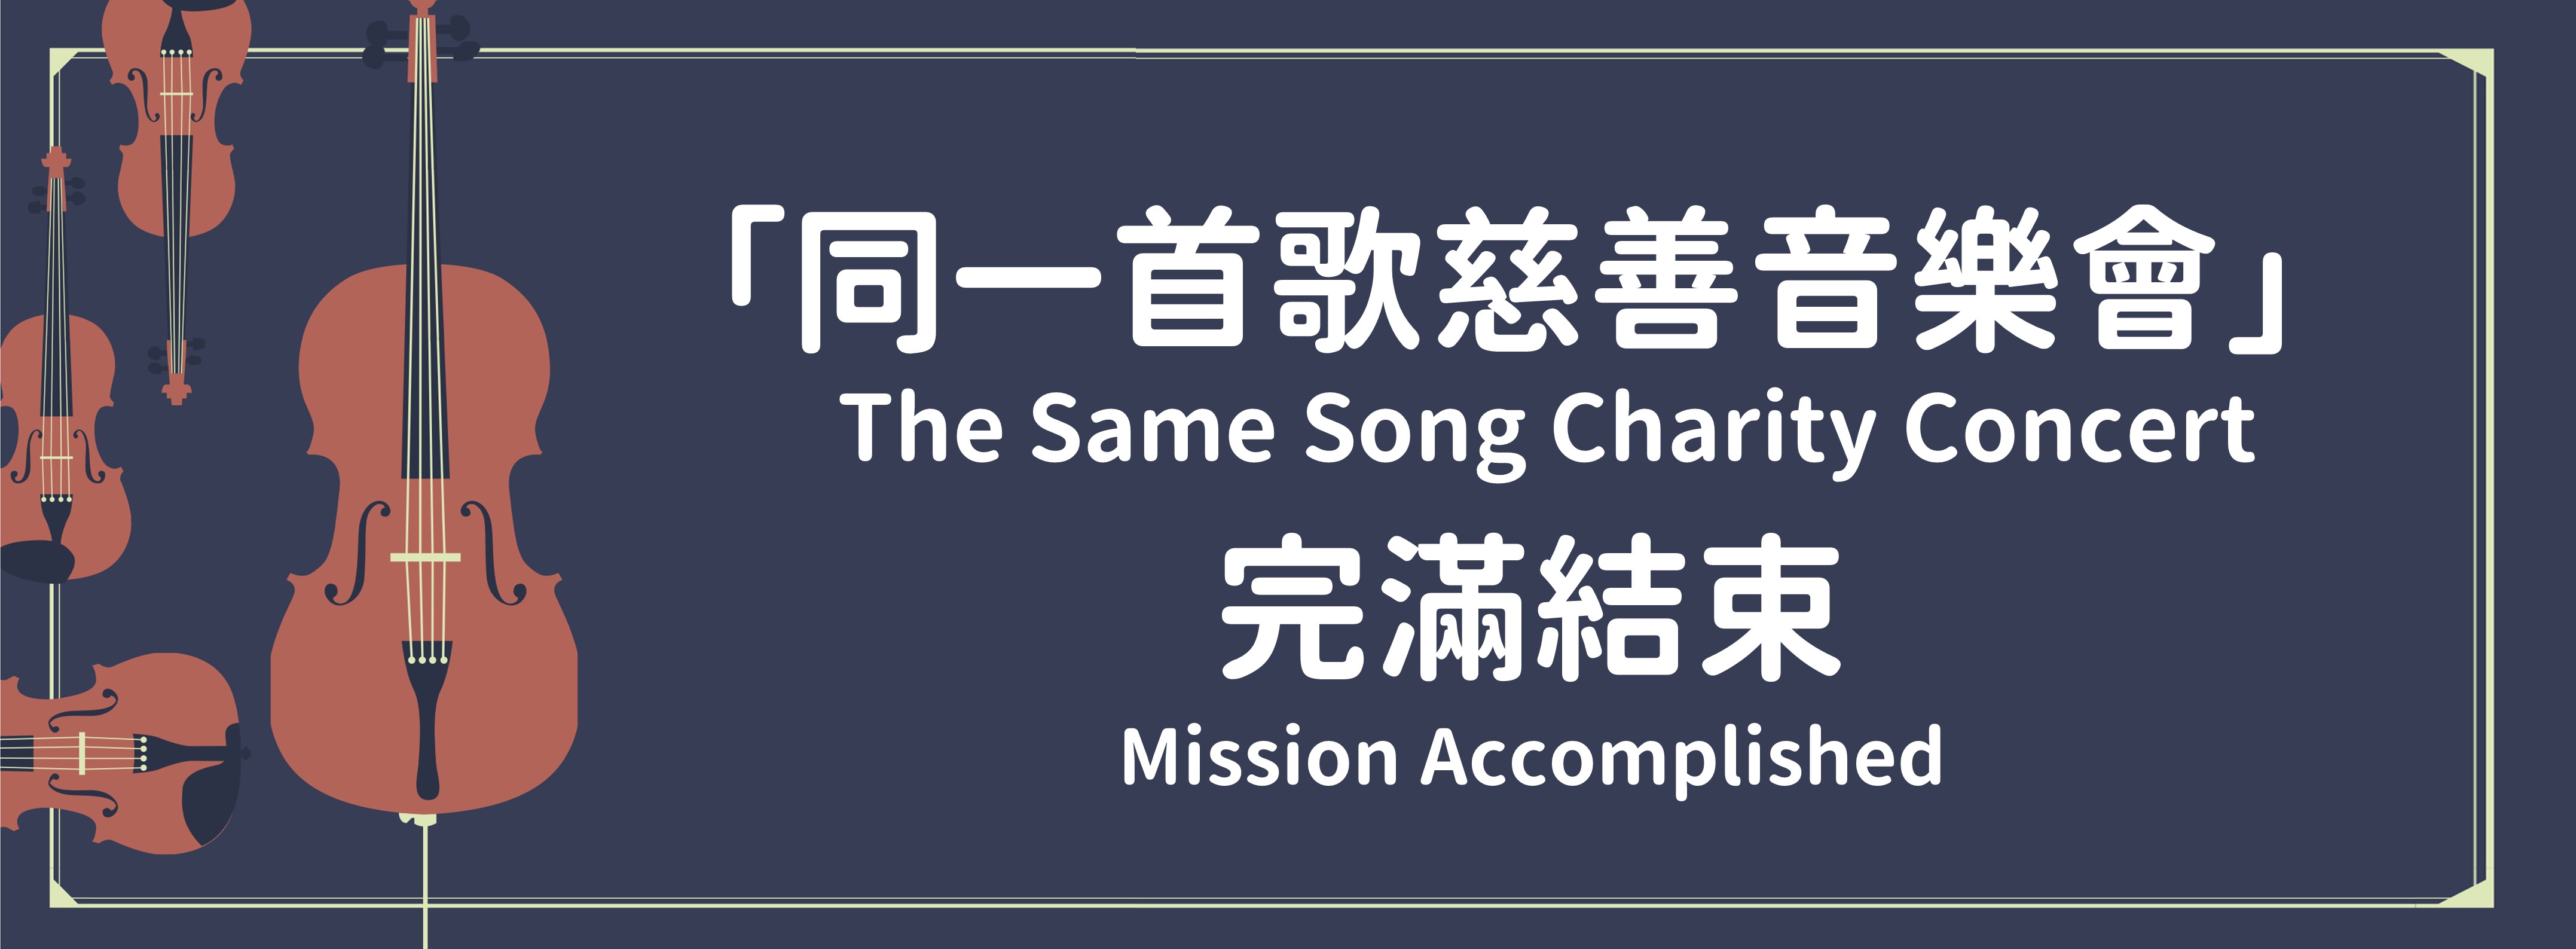 The Same Song Charity Concert Mission Accomplished